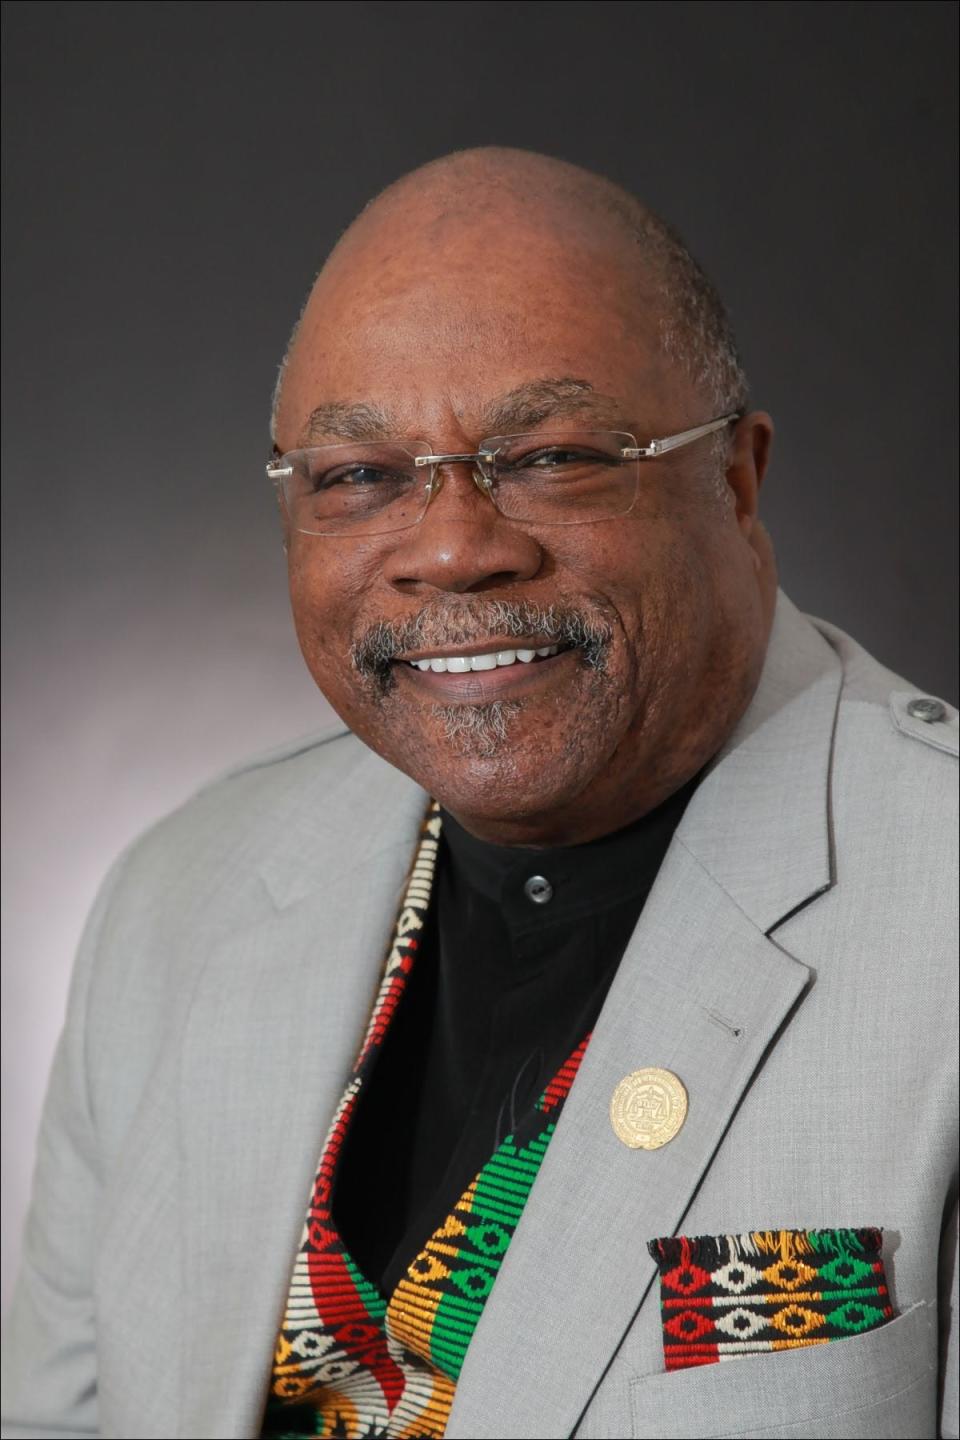 Rev. Wendell Anthony, president of the Detroit Branch of the NAACP